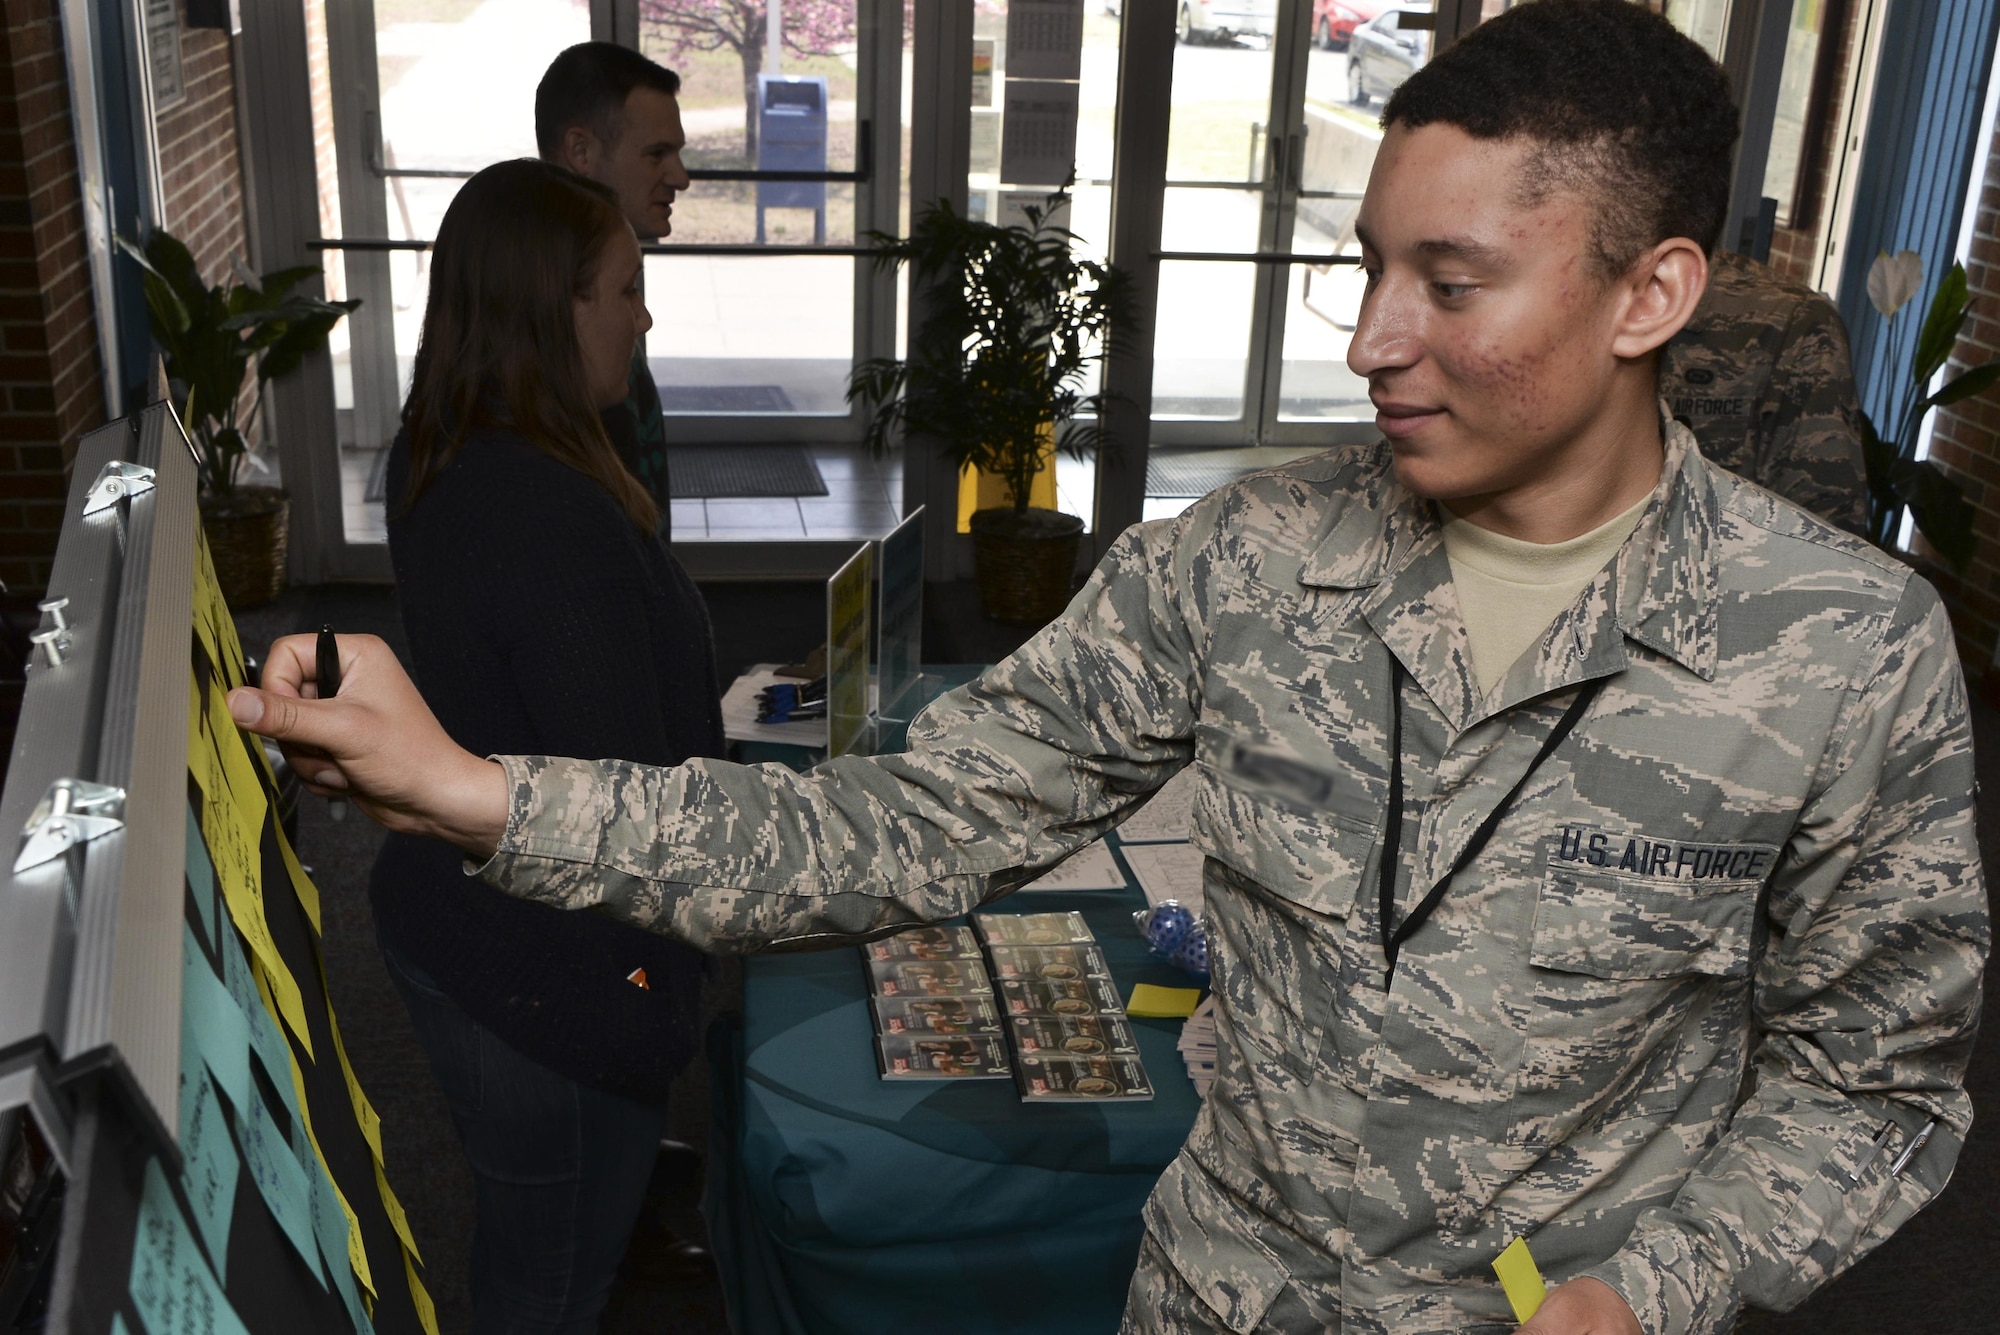 Airman 1st Class Nicholas, 22nd Intelligence Squadron, adds a sticky note with his supportive message to the Stick with Survivors board April 13. Stick with Survivors was created by the 70th Intelligence, Surveillance and Reconnaissance Wing Sexual Assault Prevention and Response office that will assist military and civilian members in showing their support for sexual assault survivors.  (U.S. Air Force photo by Staff Sgt. Alexandre Montes)